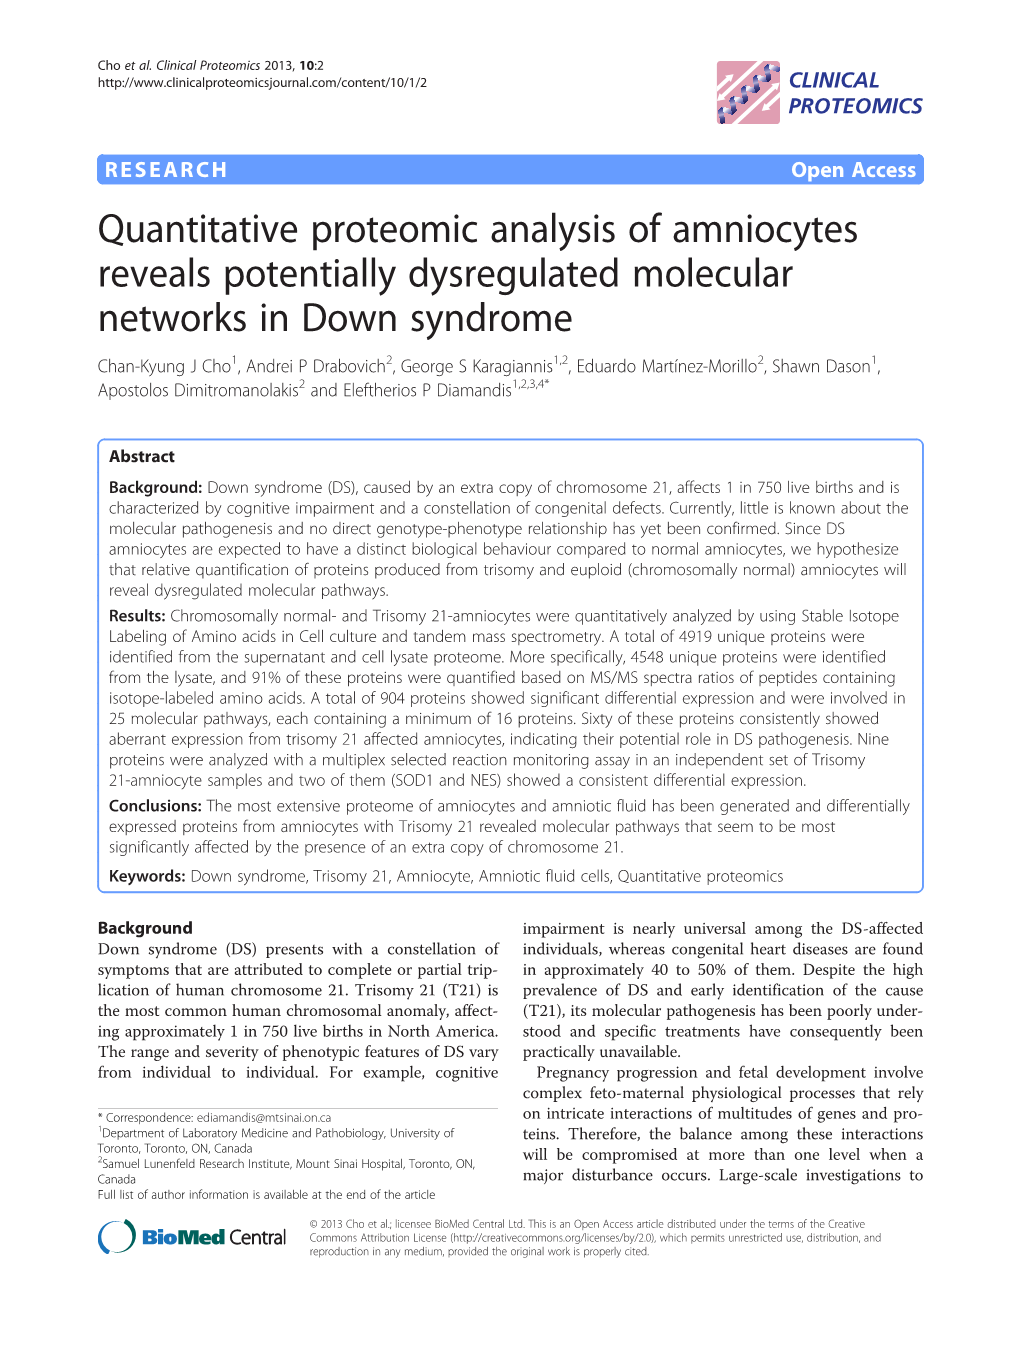 Quantitative Proteomic Analysis of Amniocytes Reveals Potentially Dysregulated Molecular Networks in Down Syndrome